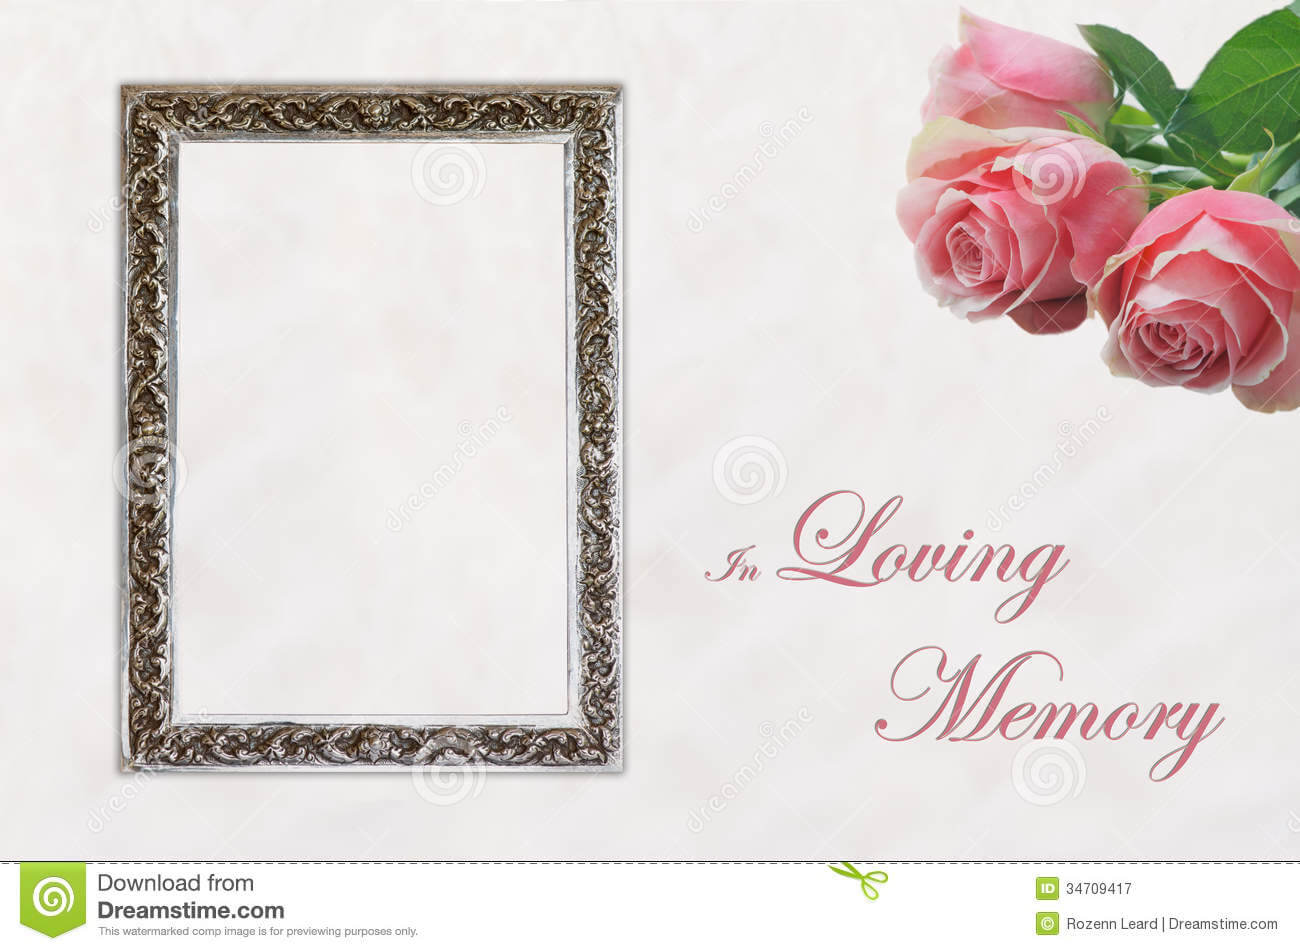 In Memory Cards Templates ] - Memory Template 4 Celebration With In Memory Cards Templates